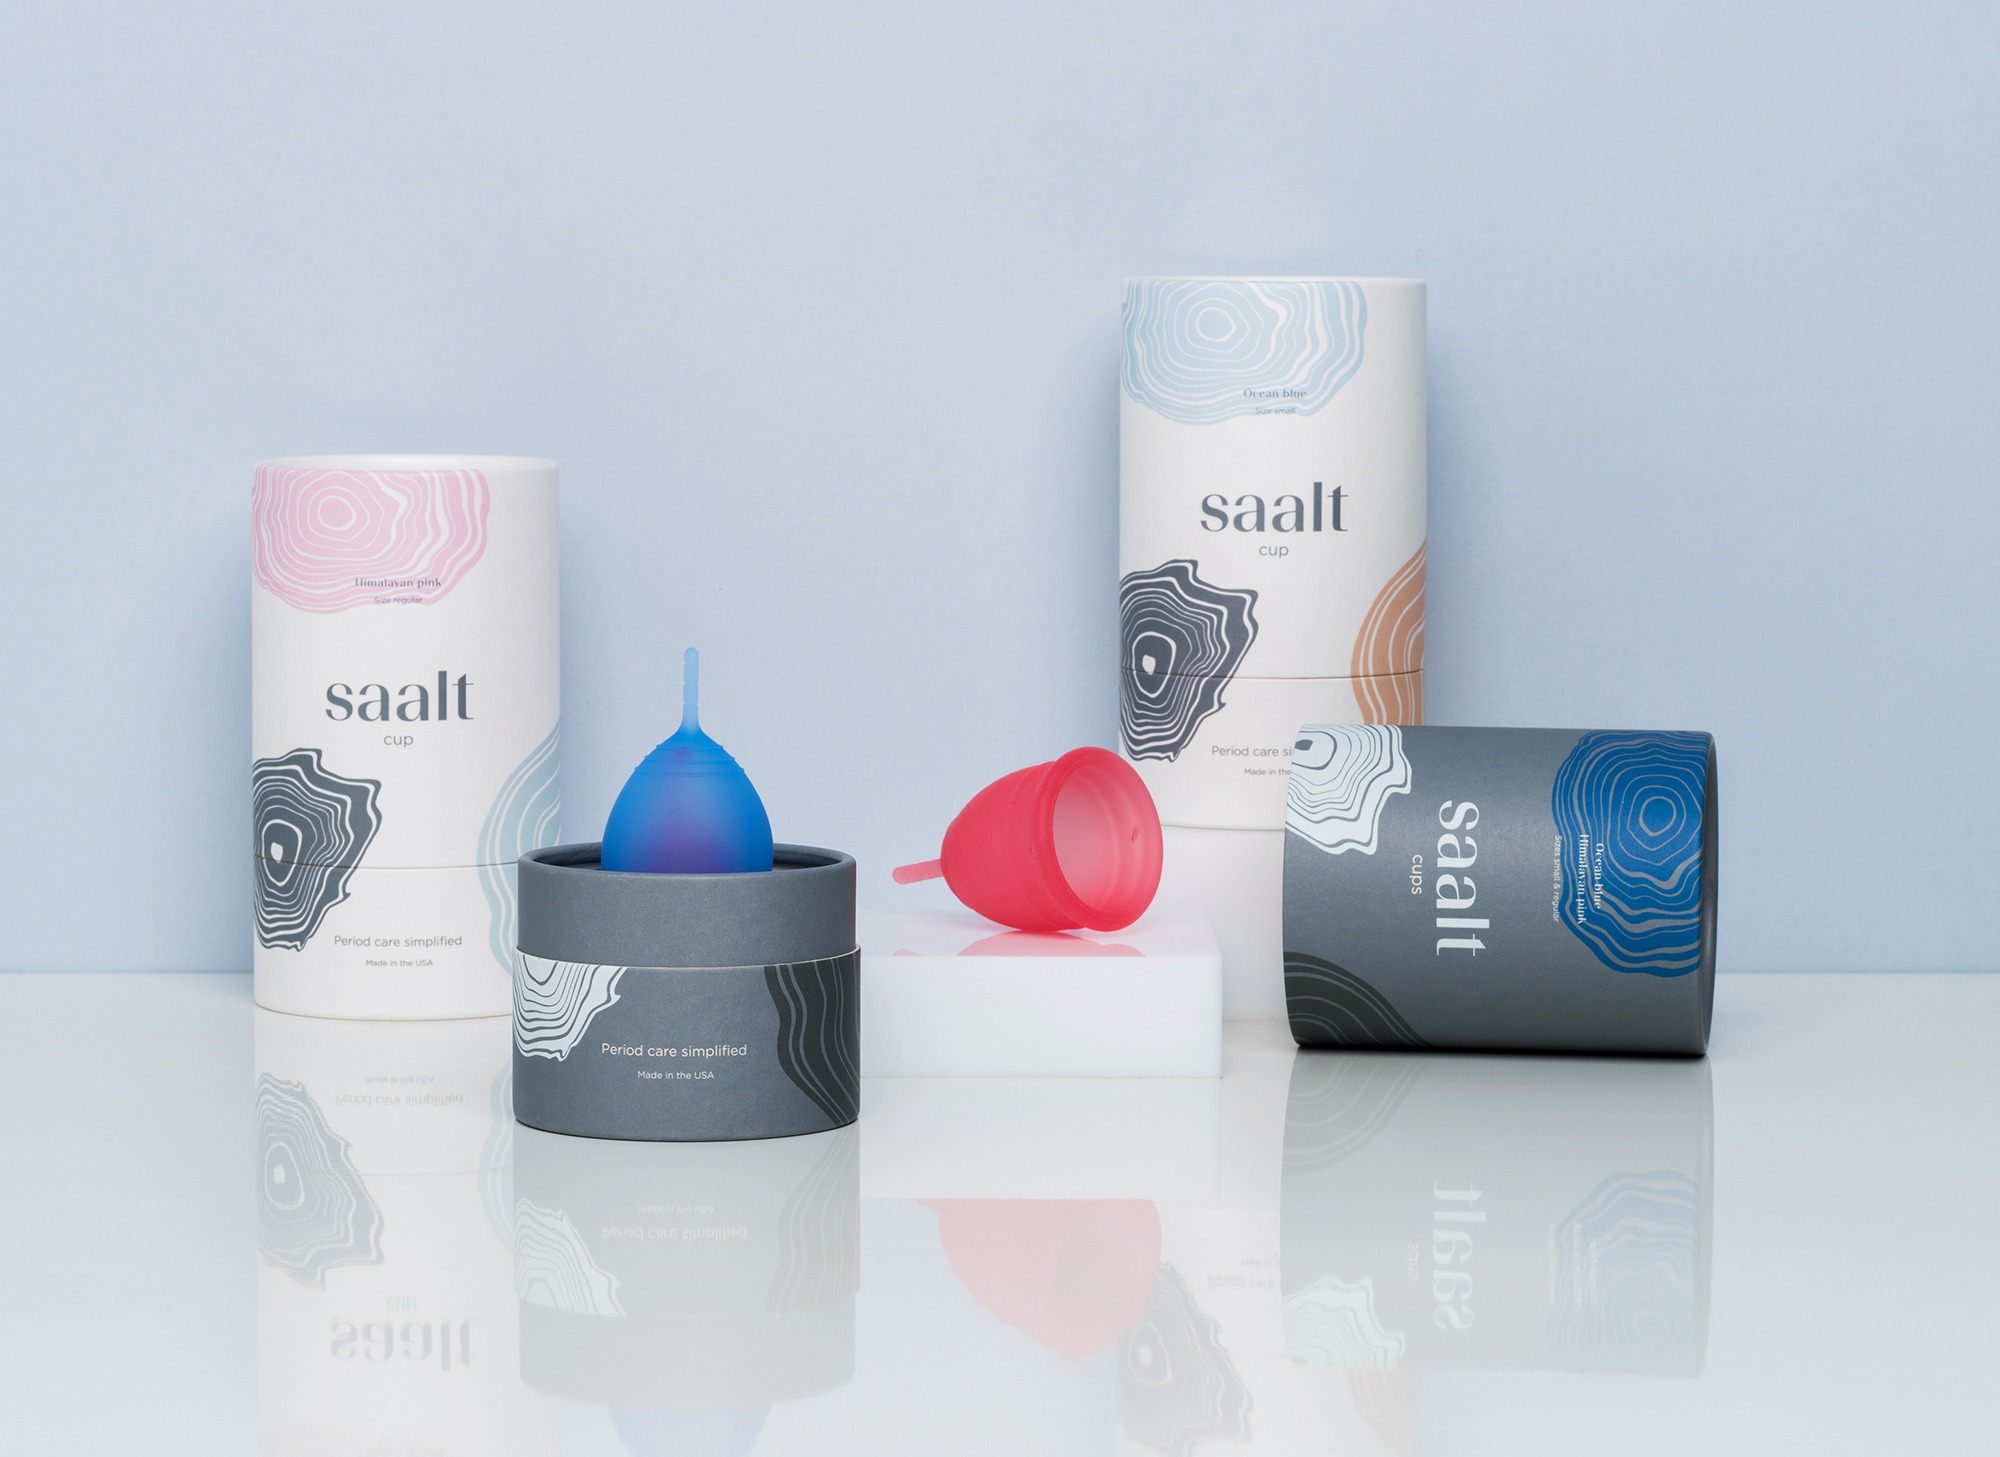 Period Care Brand Creation and Packaging Teaches You How to Use the Actual Product